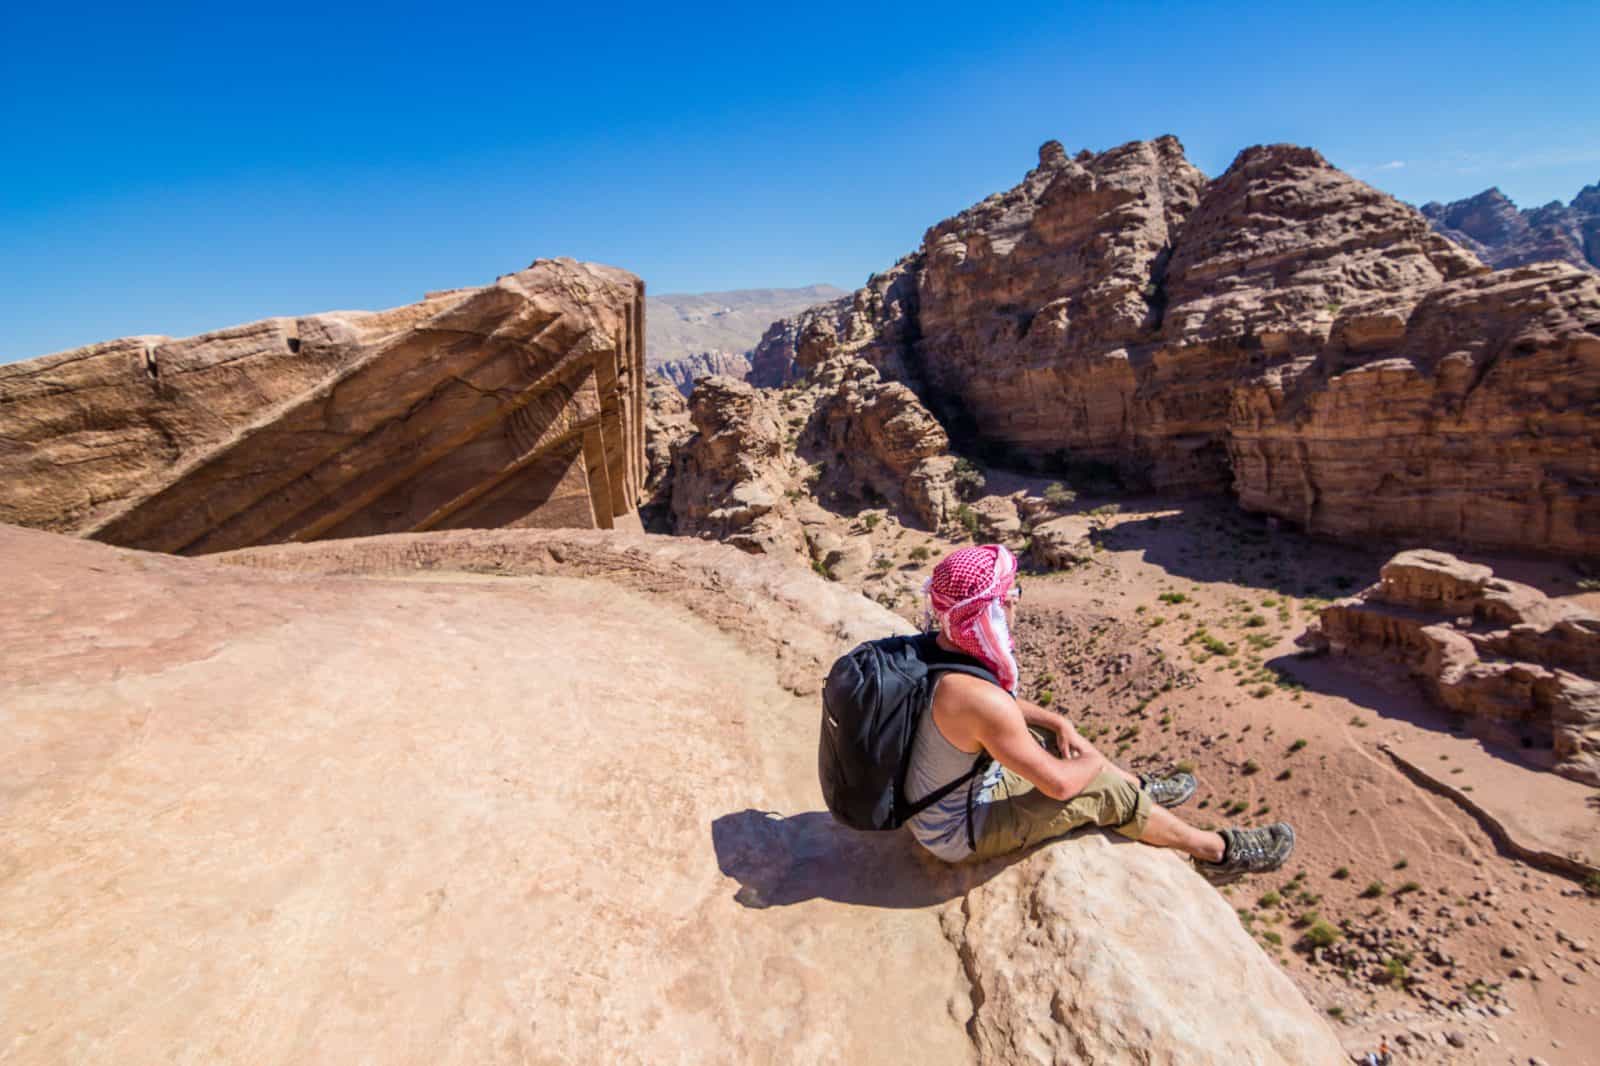 Sitting on top of the Monastery in the city of Petra, Jordan